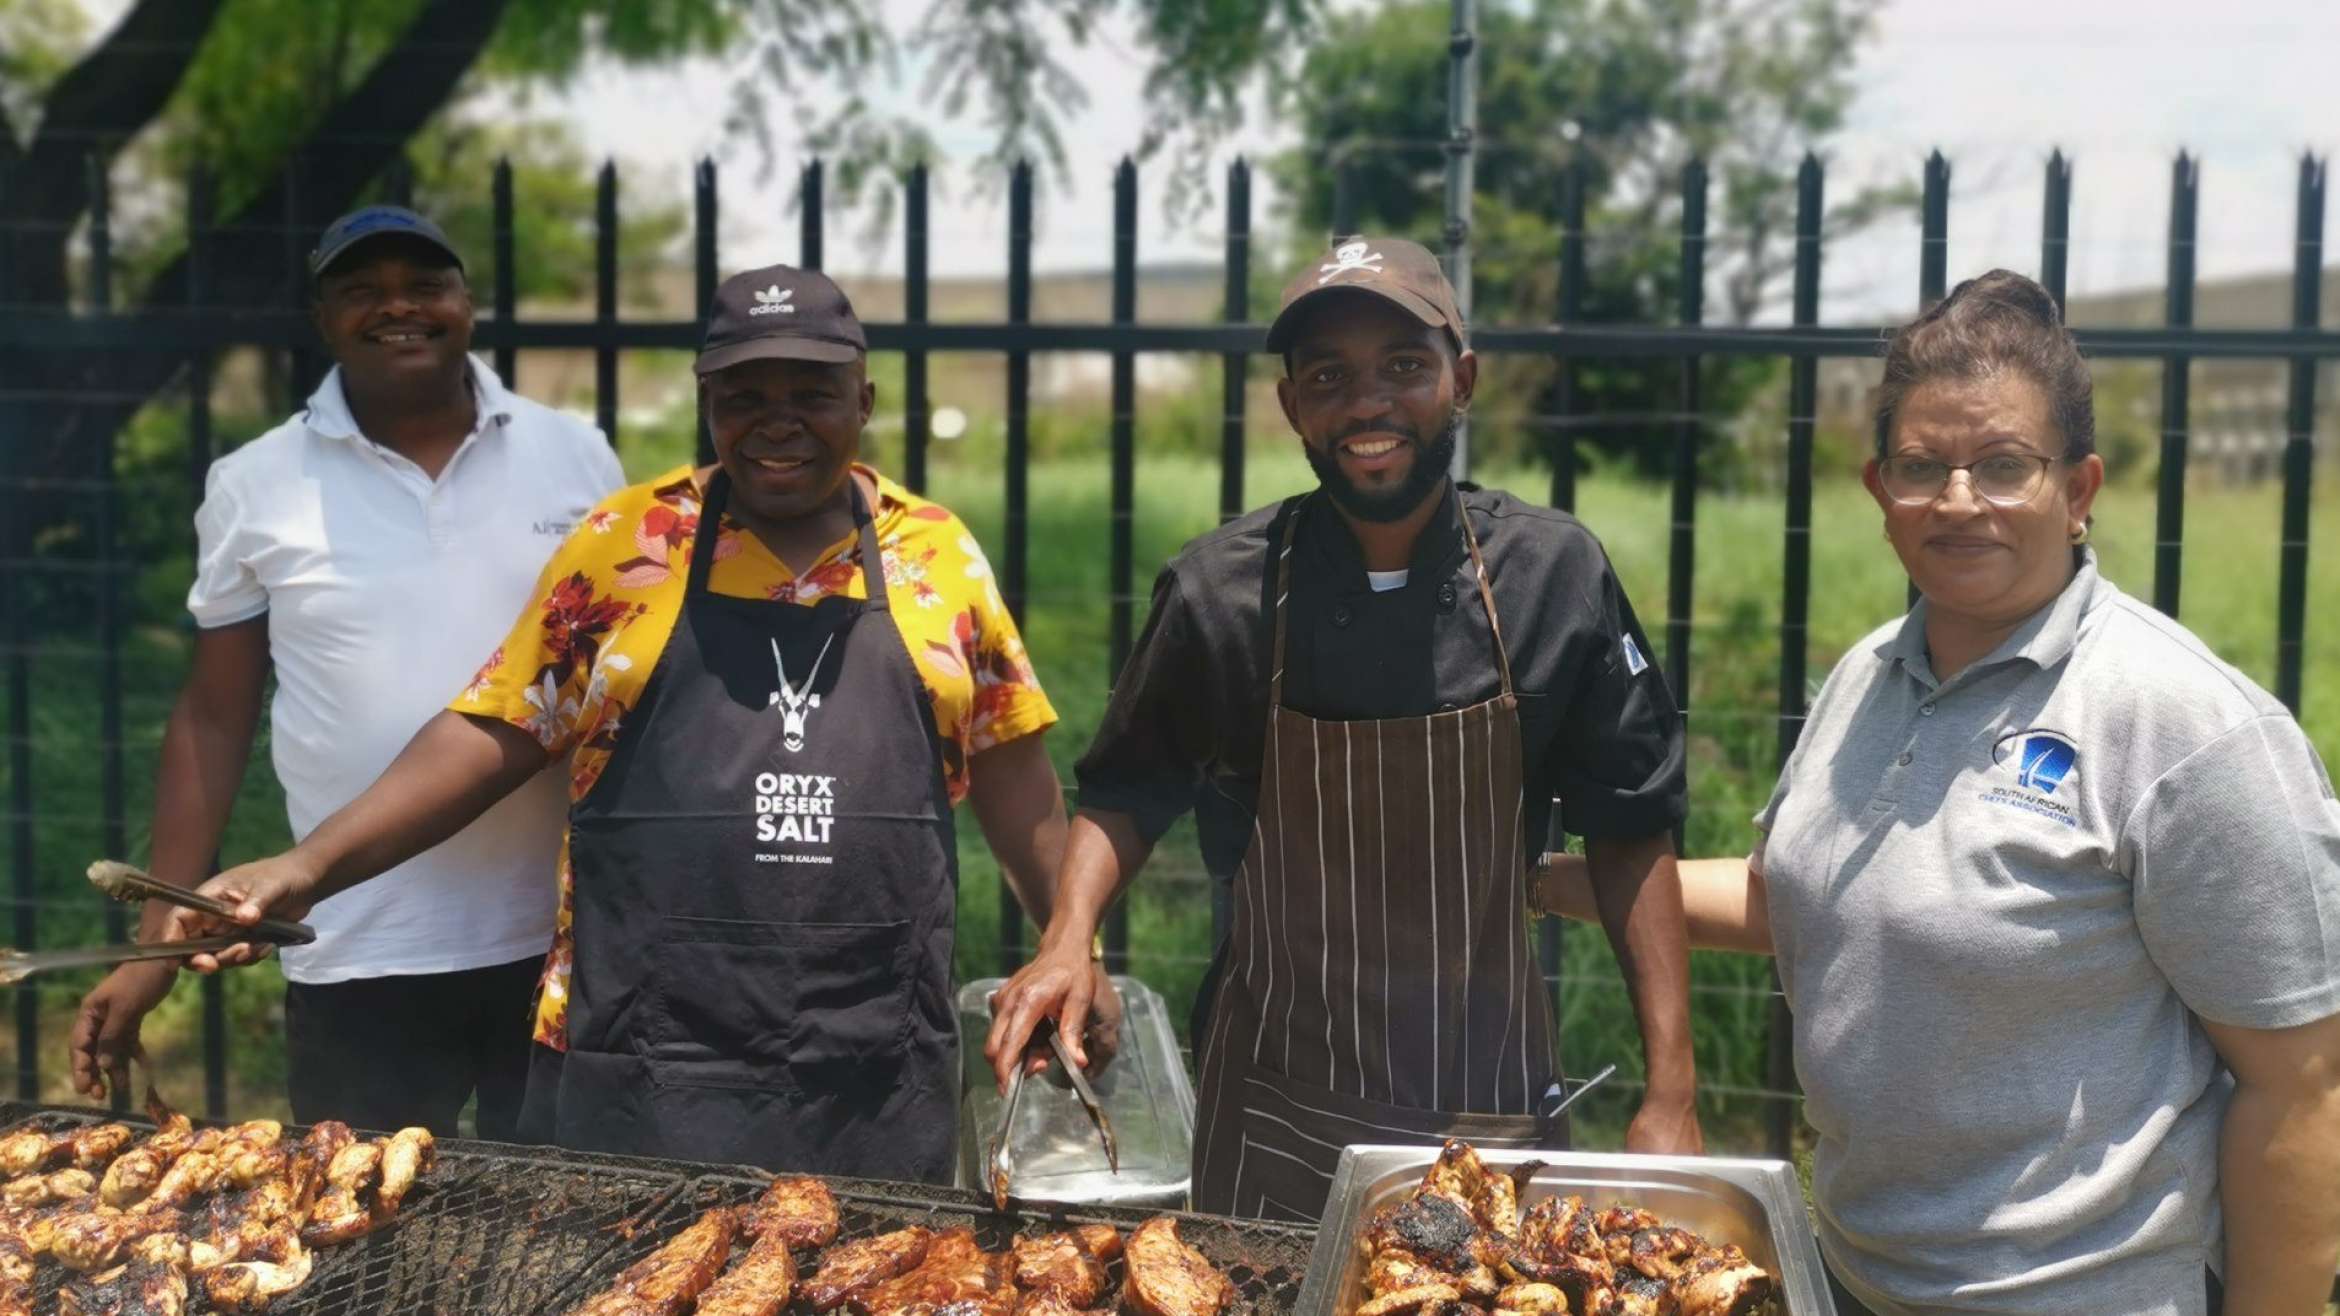 Three men and one standing behind a grill cooking food to give to those in need